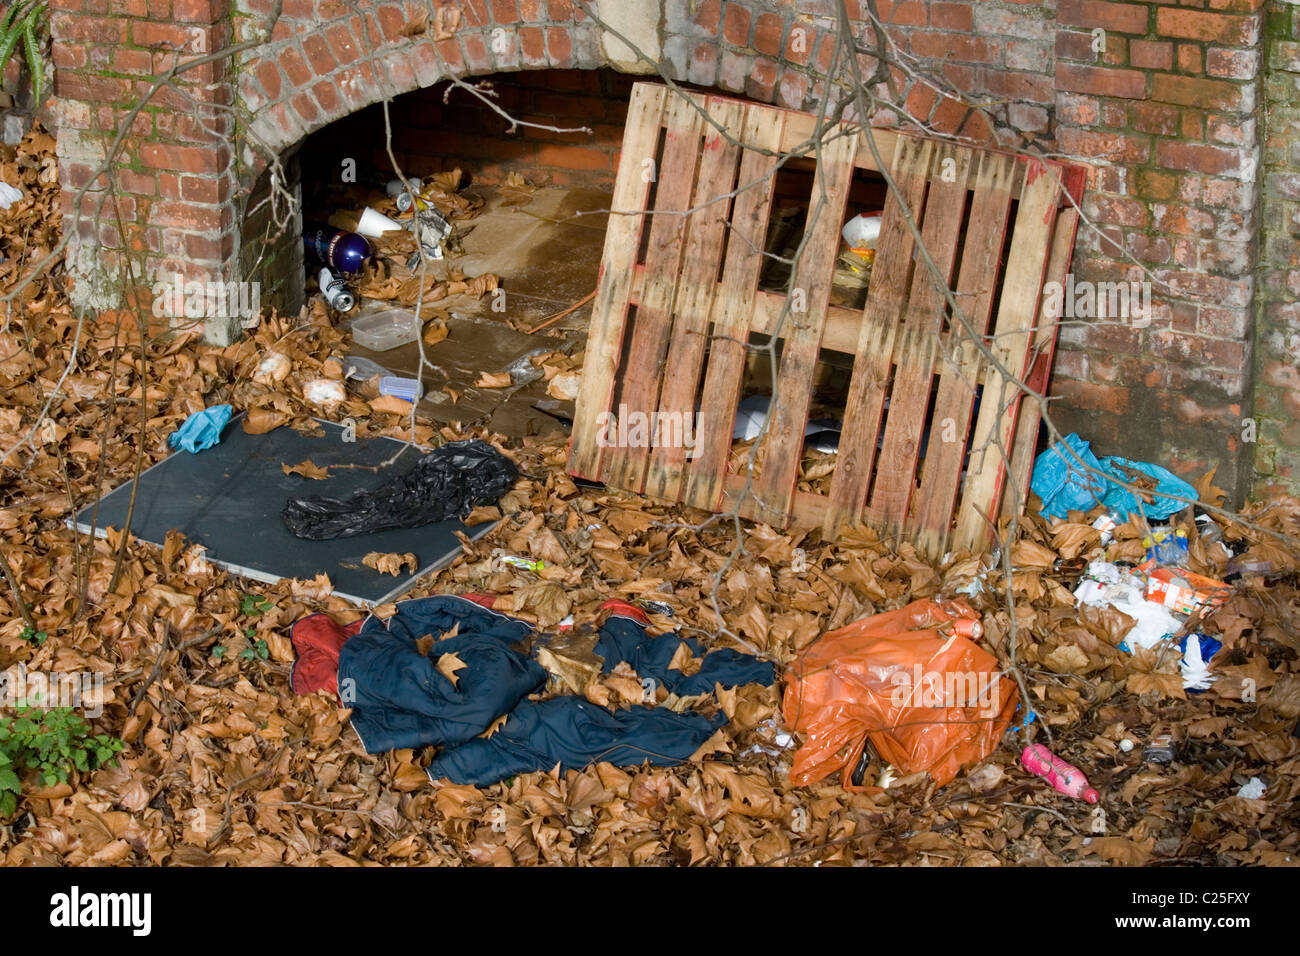 Site of a homeless persons refuge Reading, Berkshire, England UK Stock Photo